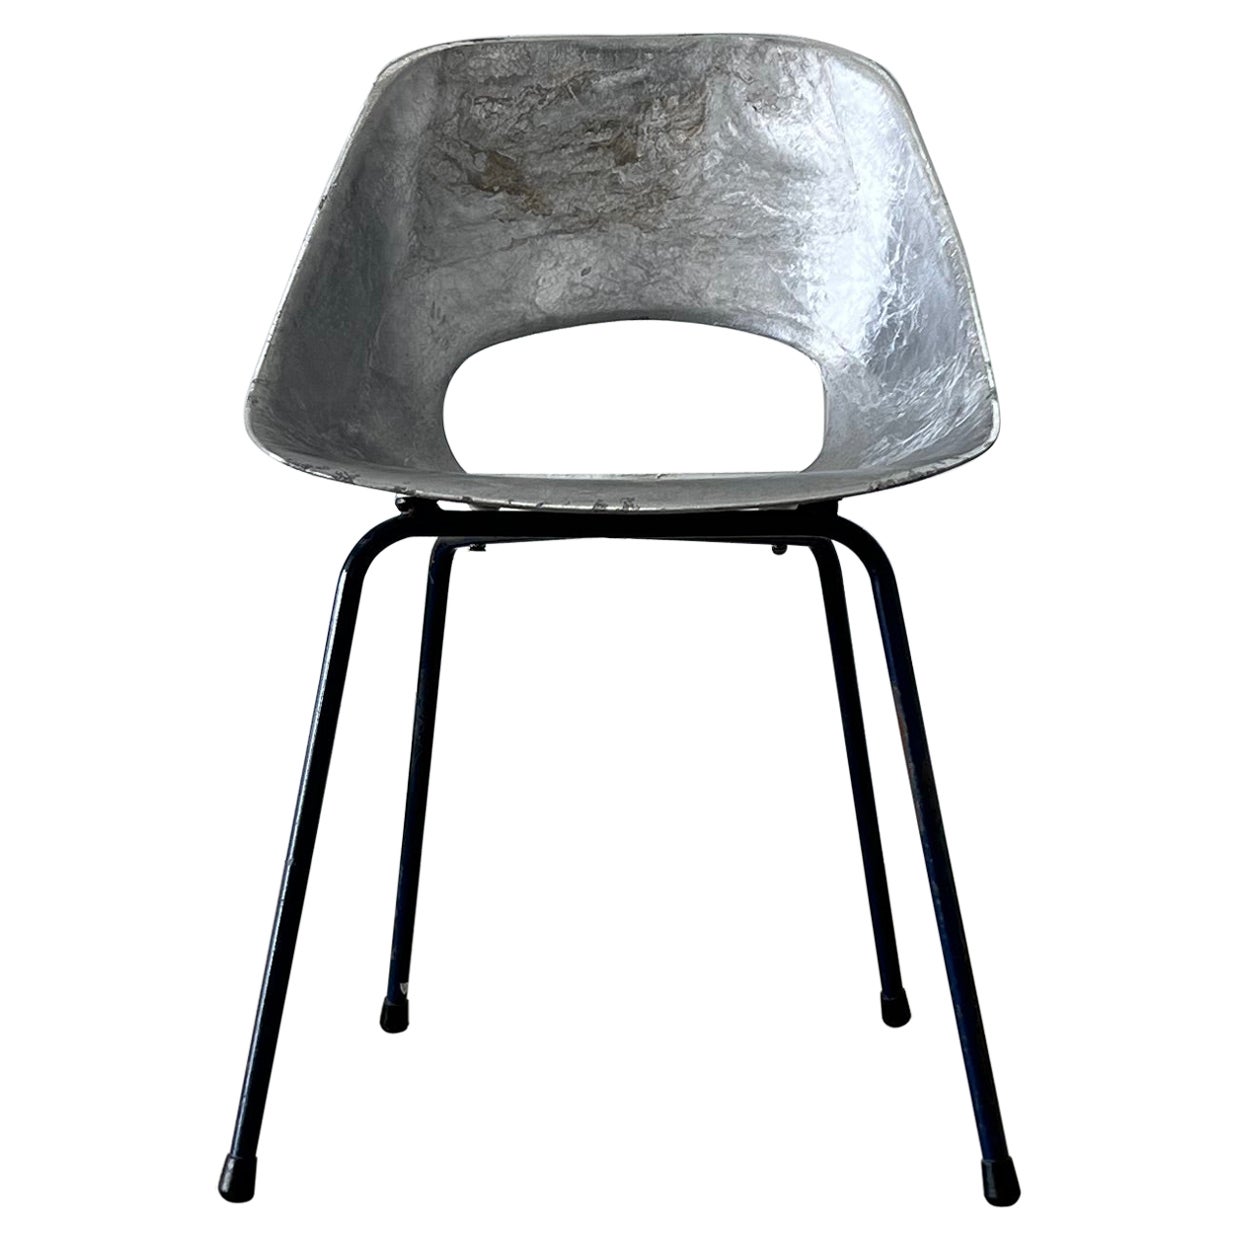 1950s Cast Aluminum Dining Chair by Pierre Guariche for Steiner